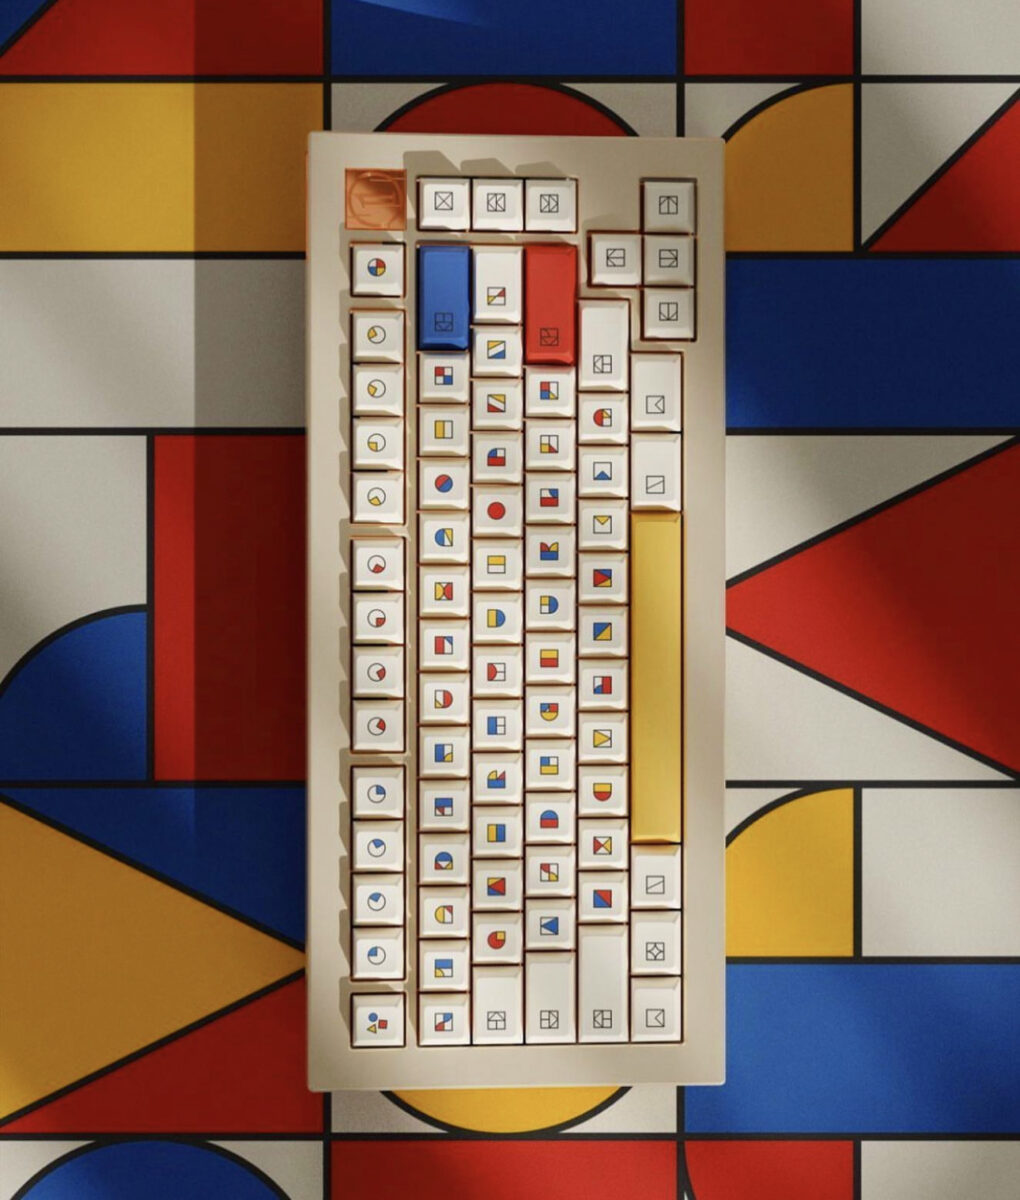 A computer keyboard with colorful shapes representing the letters, in primary colors. 